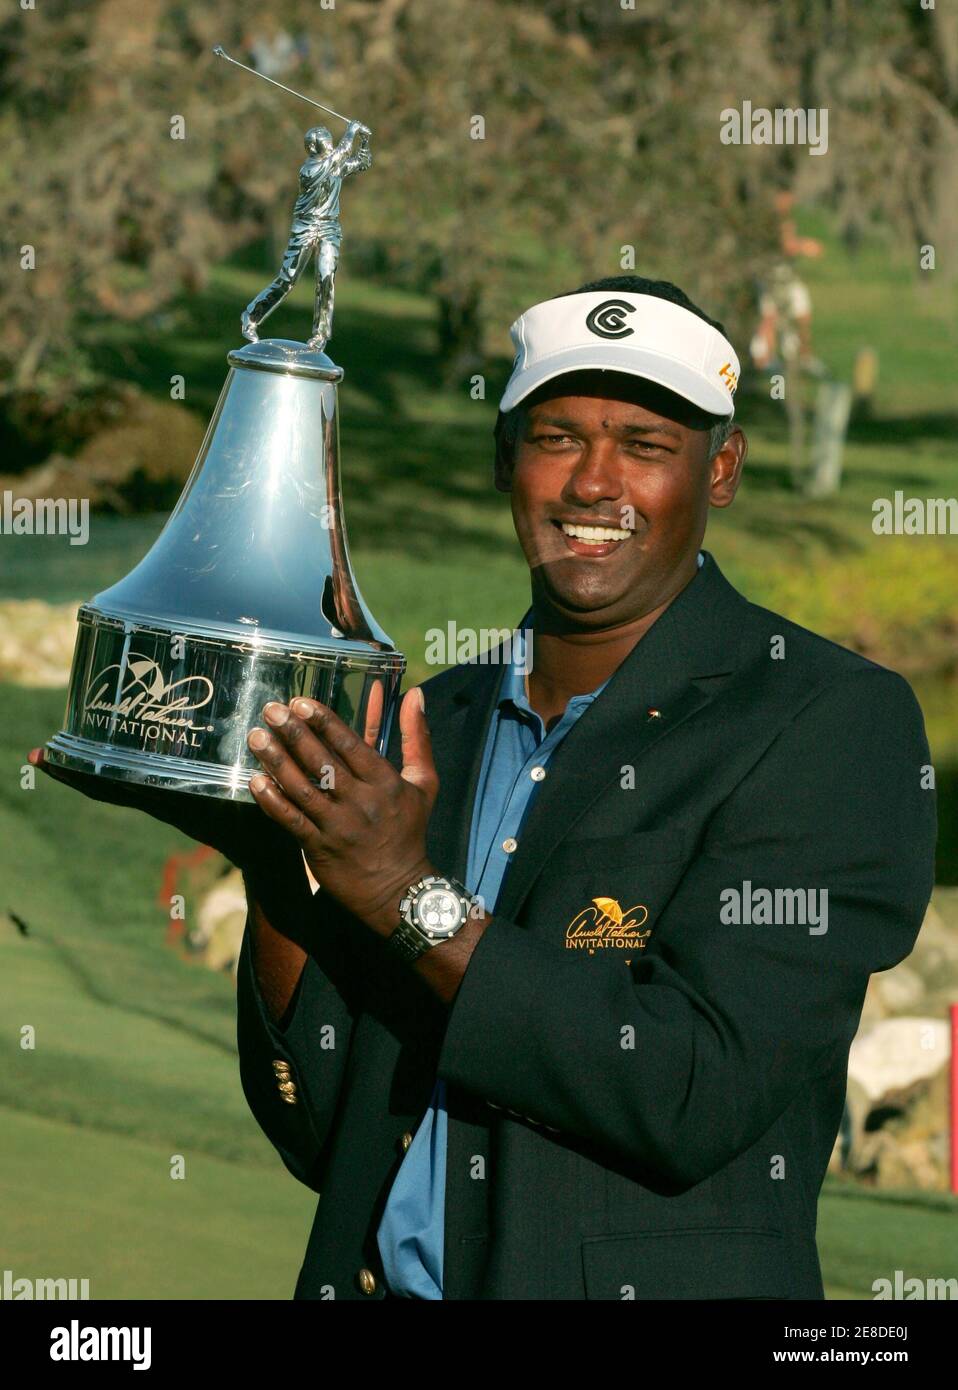 Vijay Singh of Fiji poses with the Arnold Palmer Invitational trophy after winning the tournament at the Bay Hill Club in Orlando, Florida, March 18, 2007.  REUTERS/Rick Fowler (UNITED STATES) Stock Photo